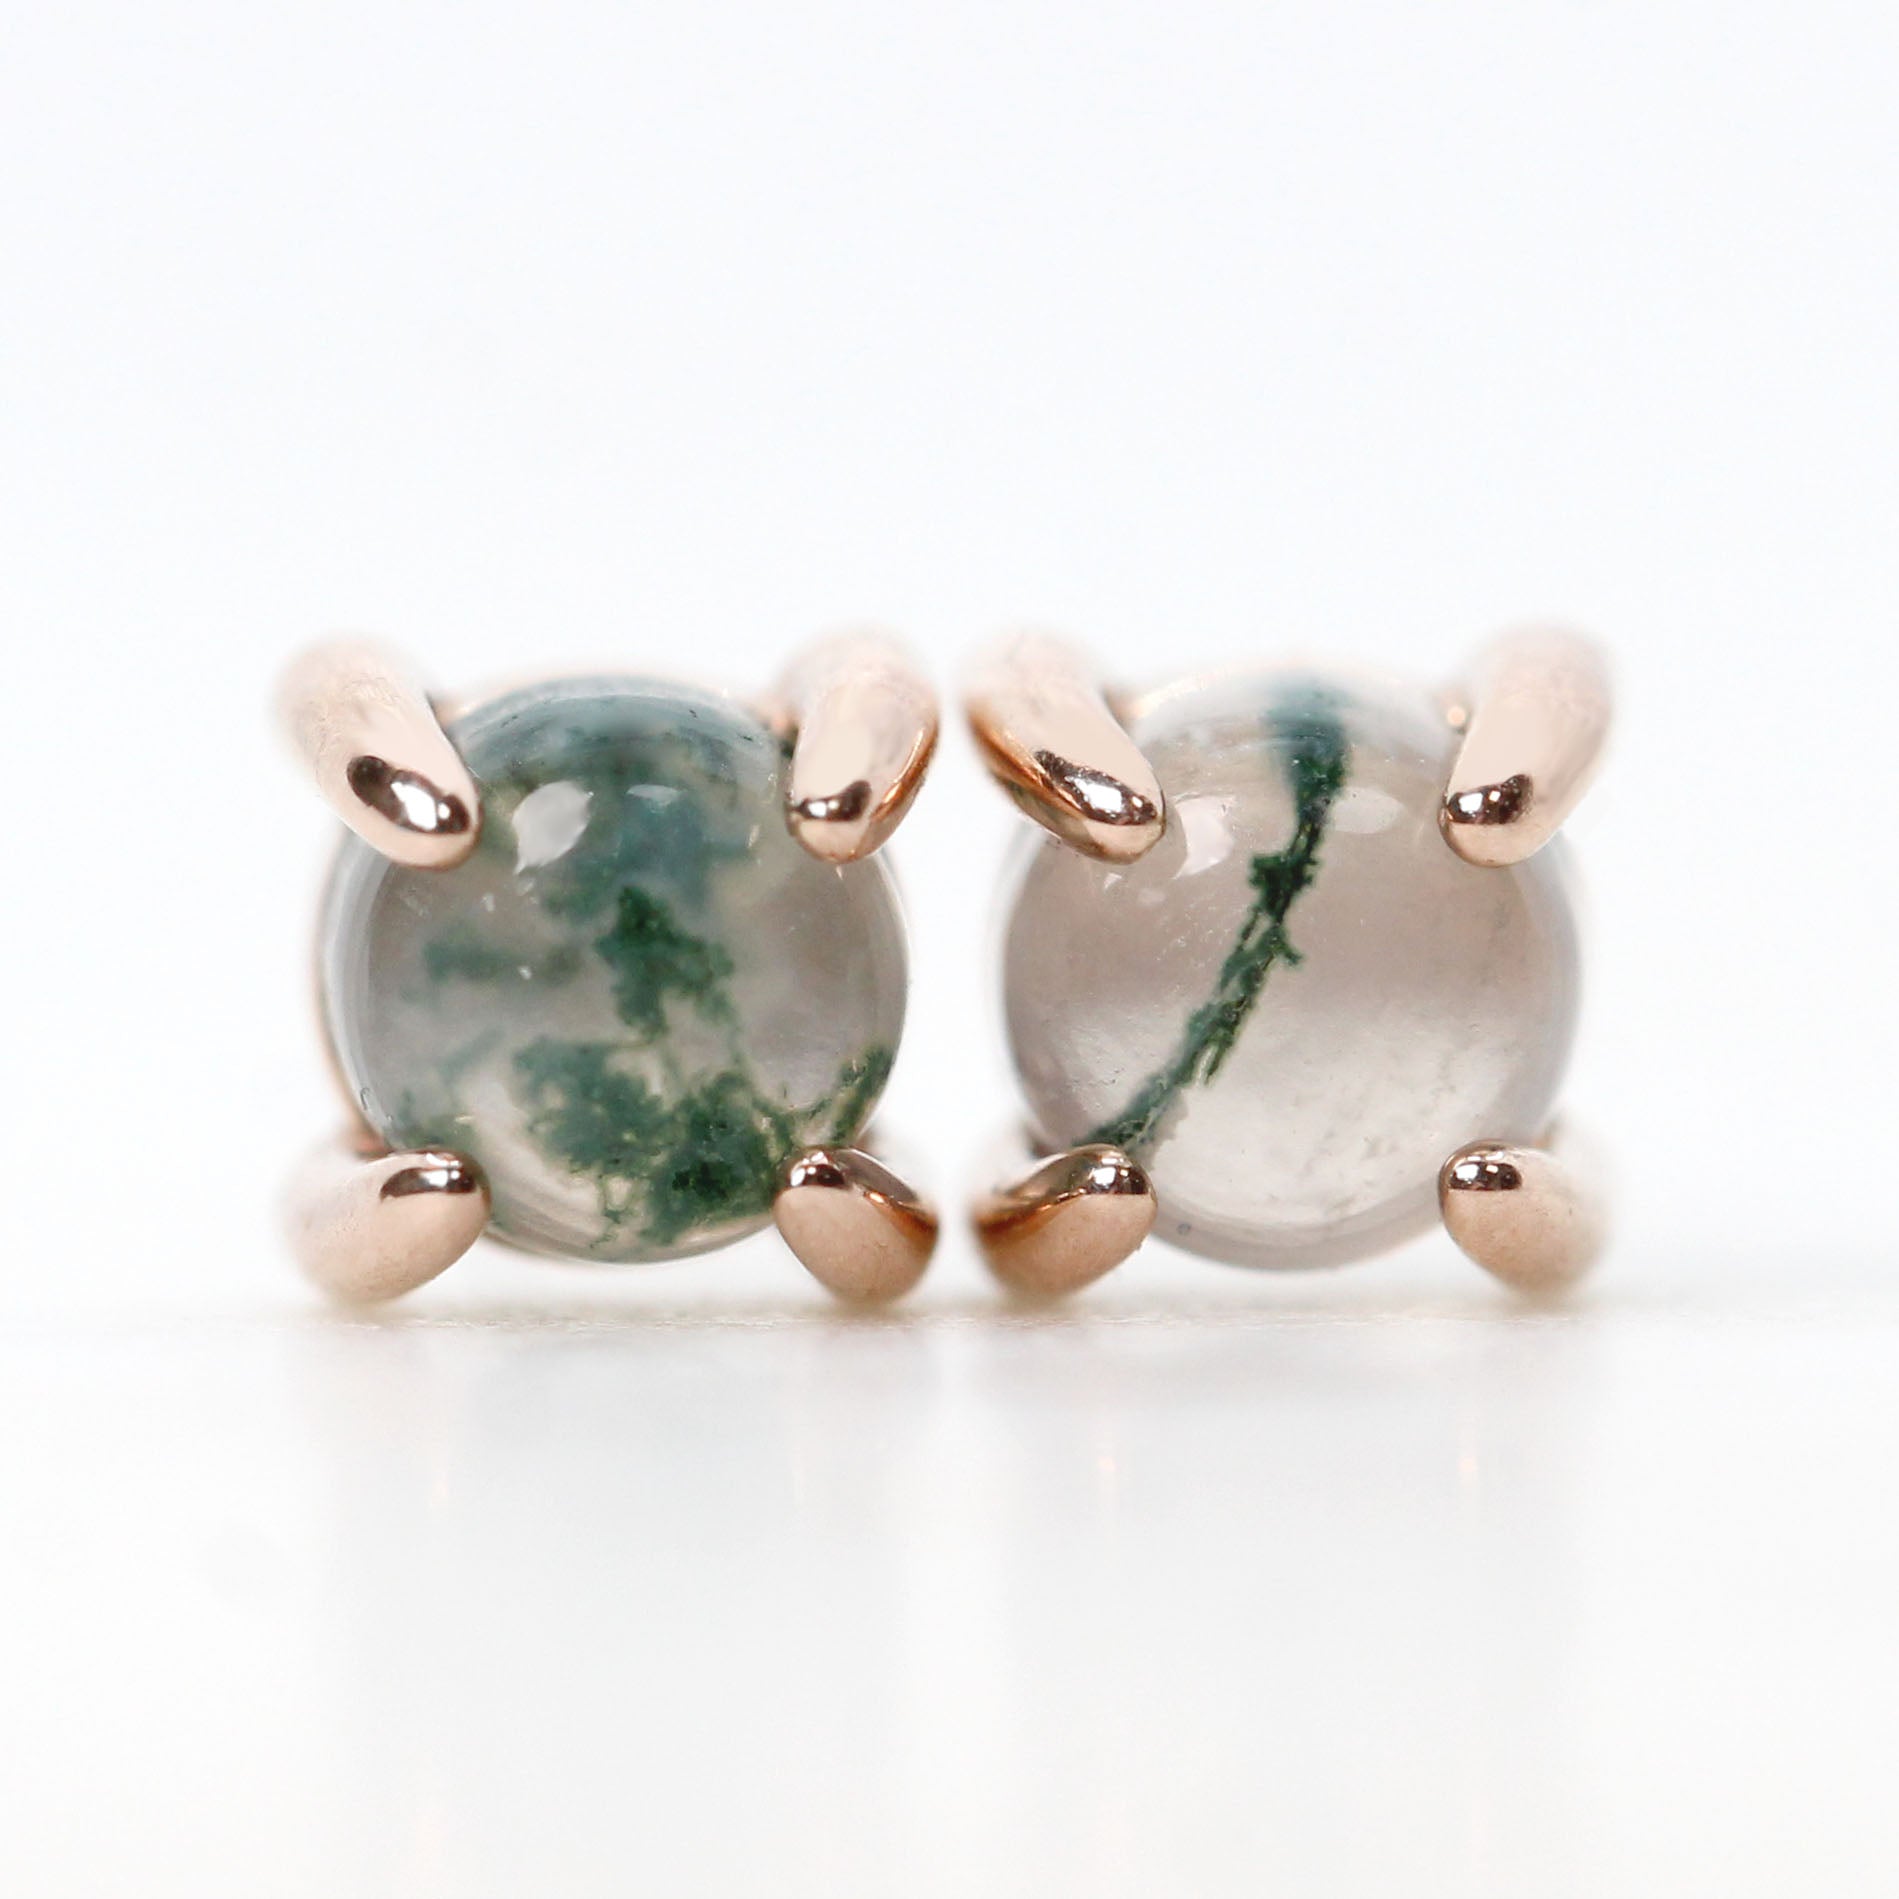 Moss Agate Stud Earrings - Choose your Gold Tone - Midwinter Co. Alternative Bridal Rings and Modern Fine Jewelry